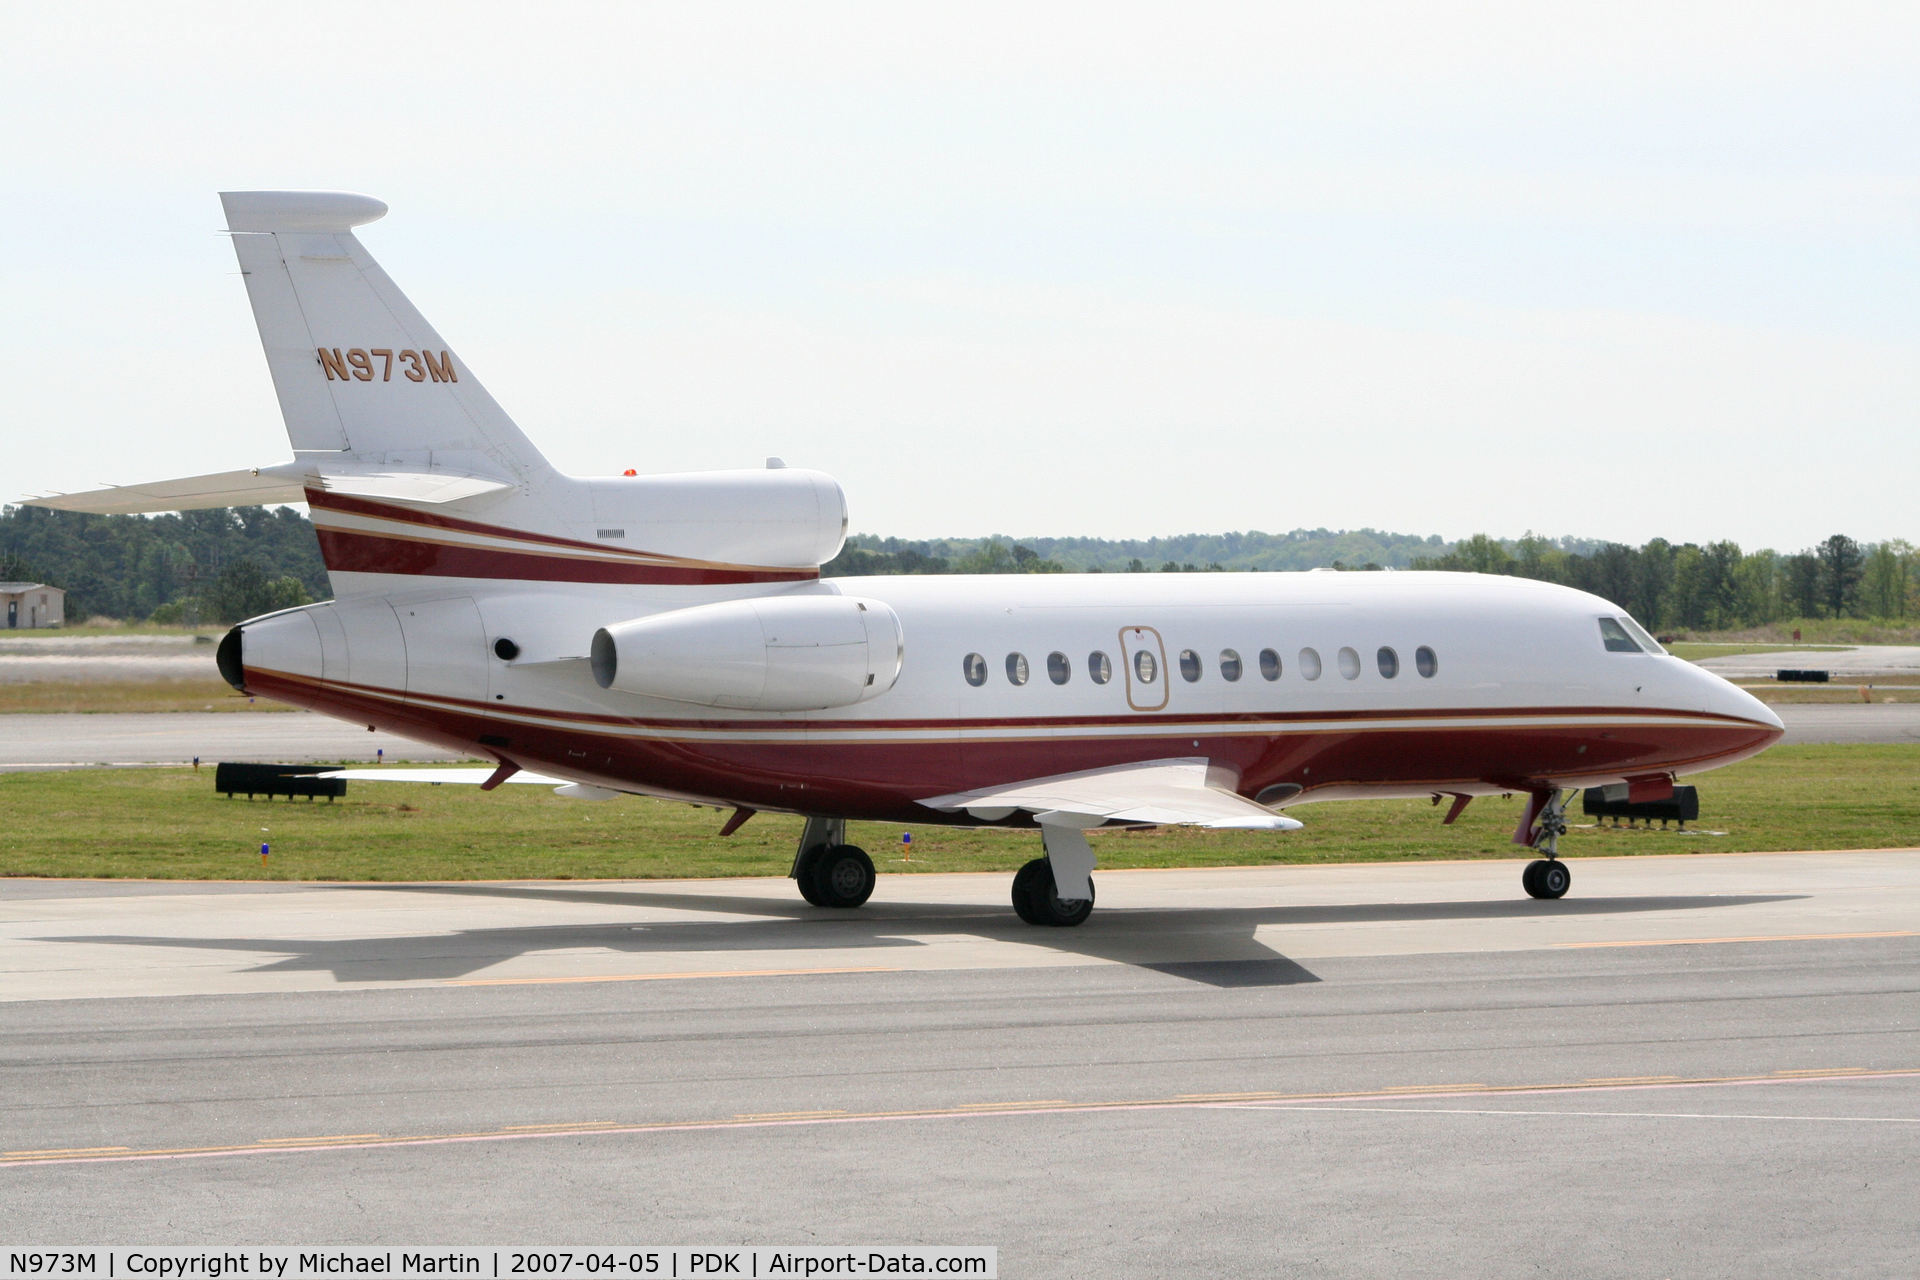 N973M, 2000 Dassault Falcon 900EX C/N 73, Taxing to Runway 2R